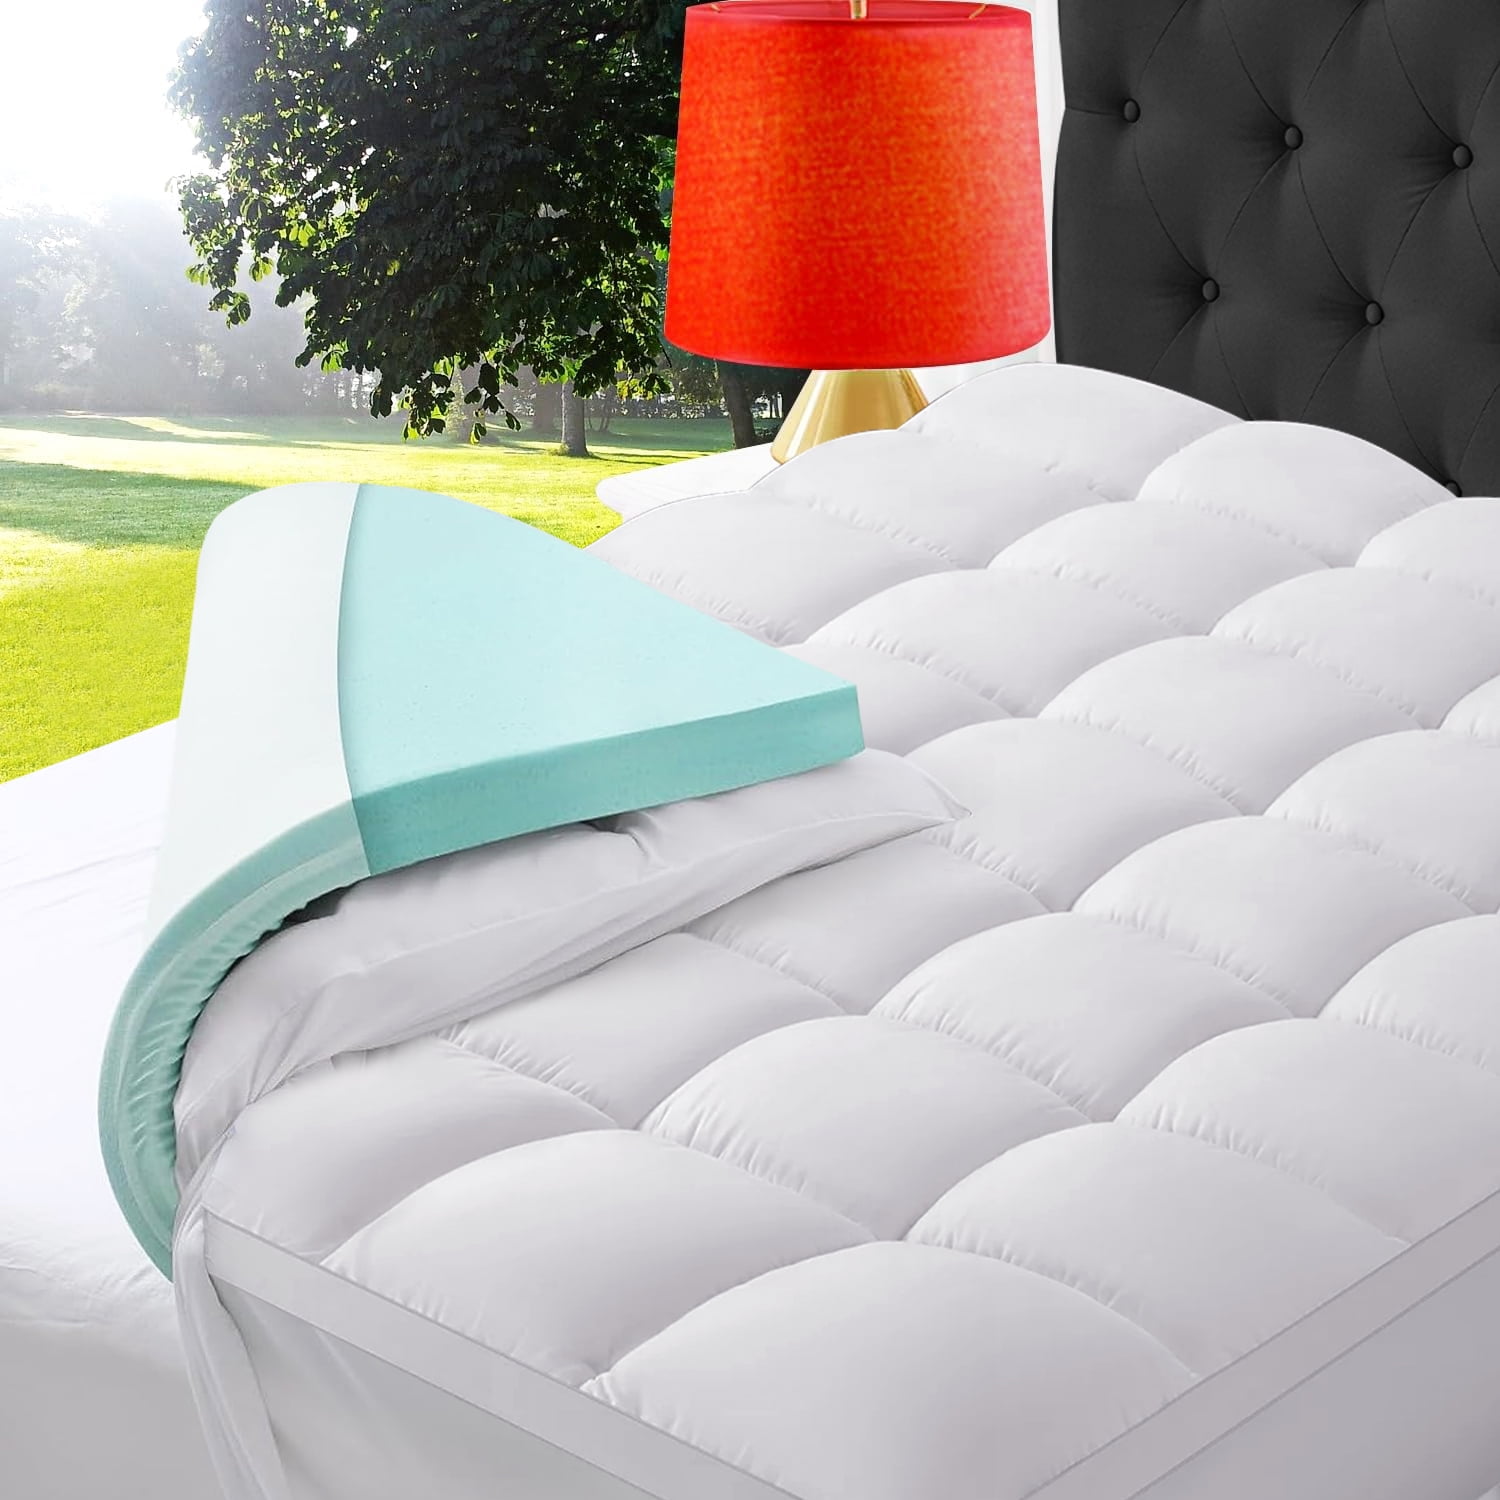 How Often Should You Replace Your Memory Foam Topper? – Crafted Beds Ltd